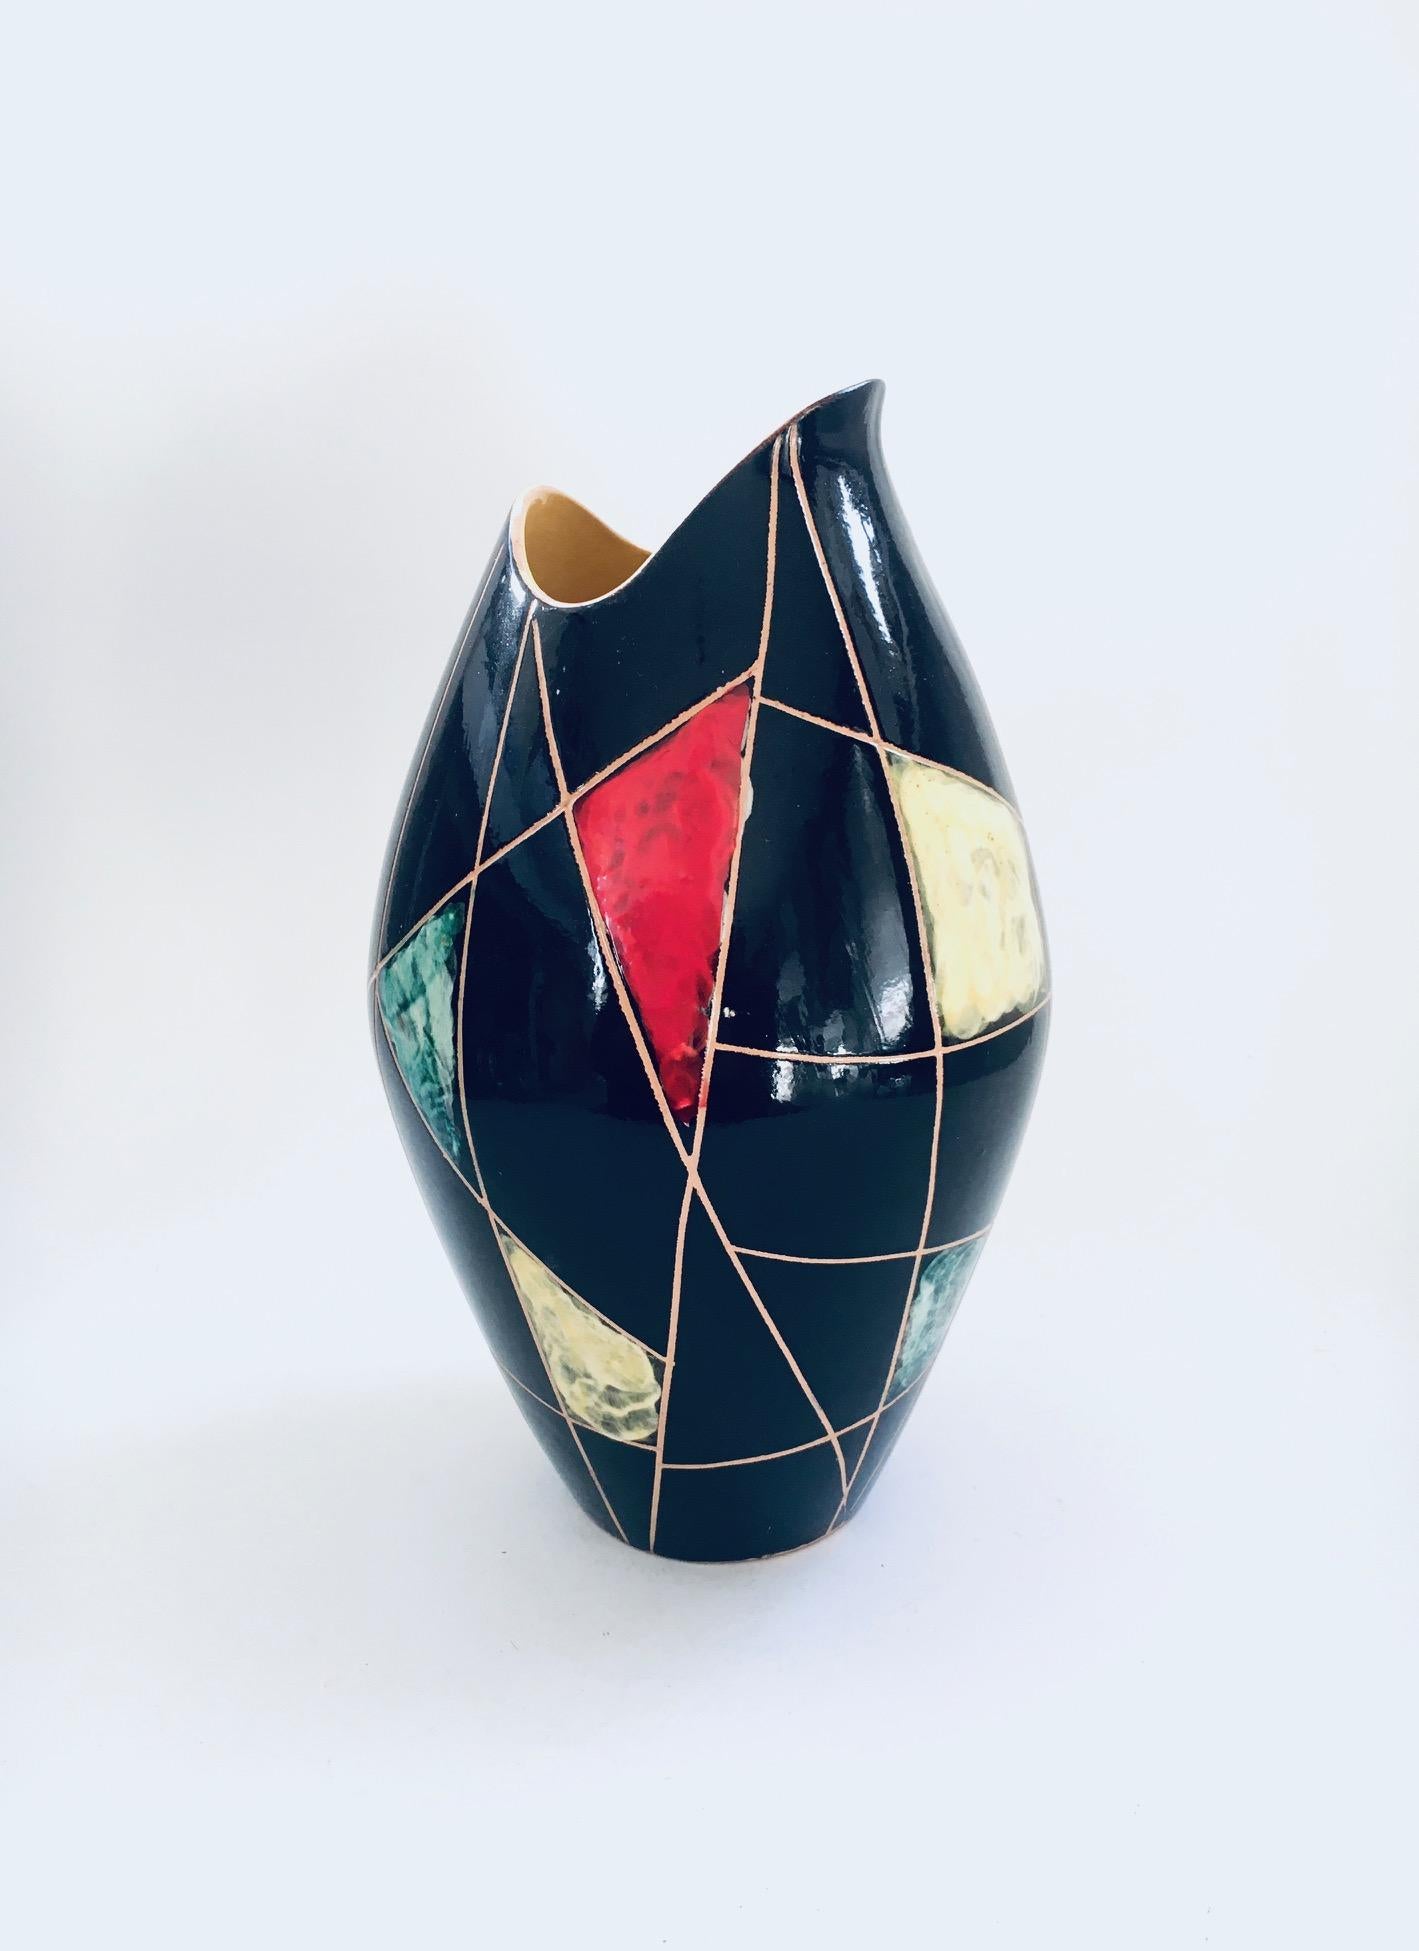 Mid-20th Century Art Ceramic Vase KRETA 41815 by Brothers Conradt, West Germany 1960's For Sale